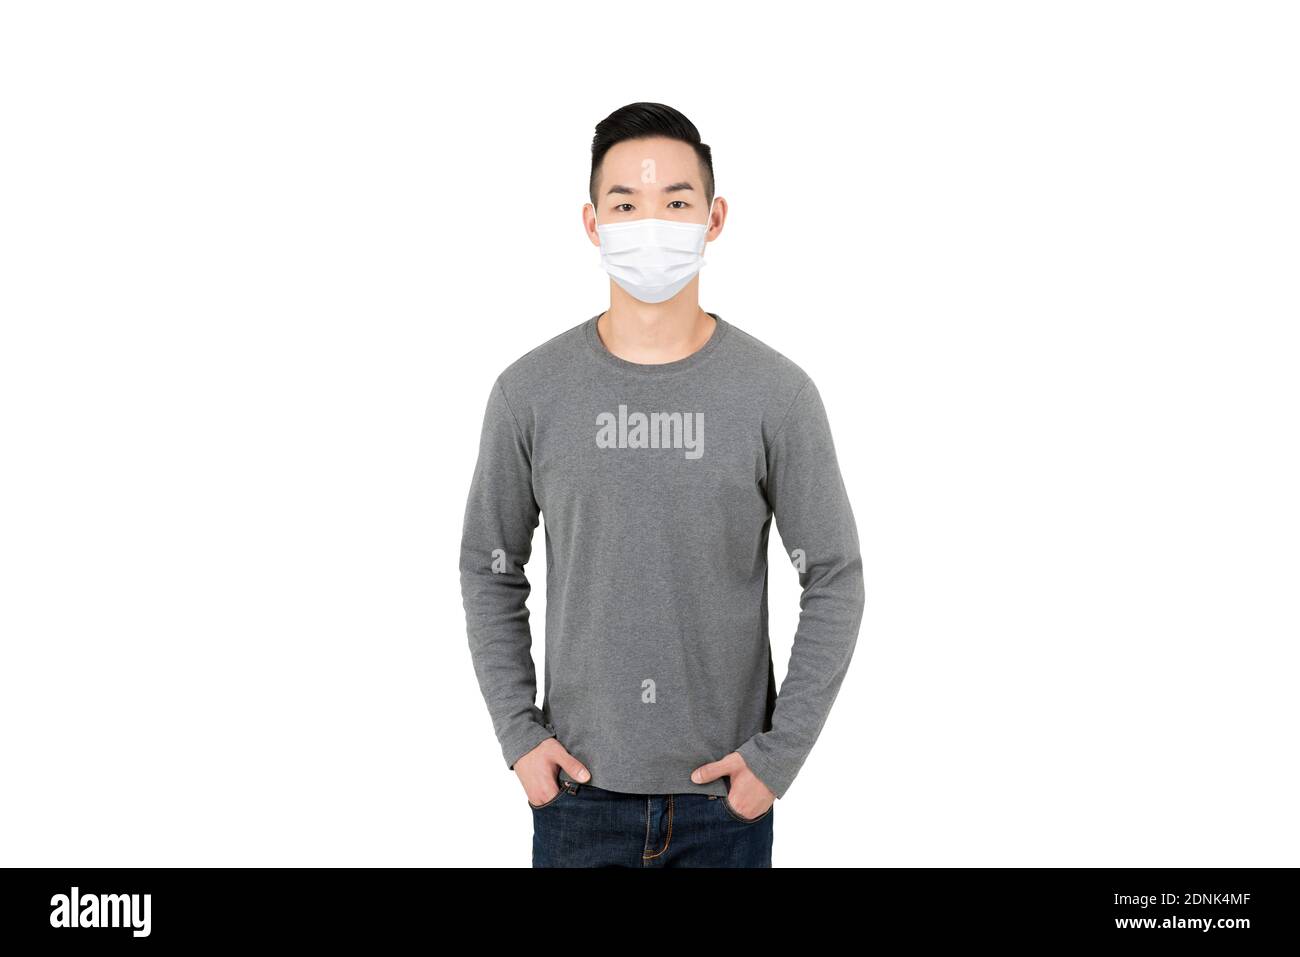 young Asian man wearing medical face mask isolated on white background for Covid-19 protection and new normal concepts Stock Photo